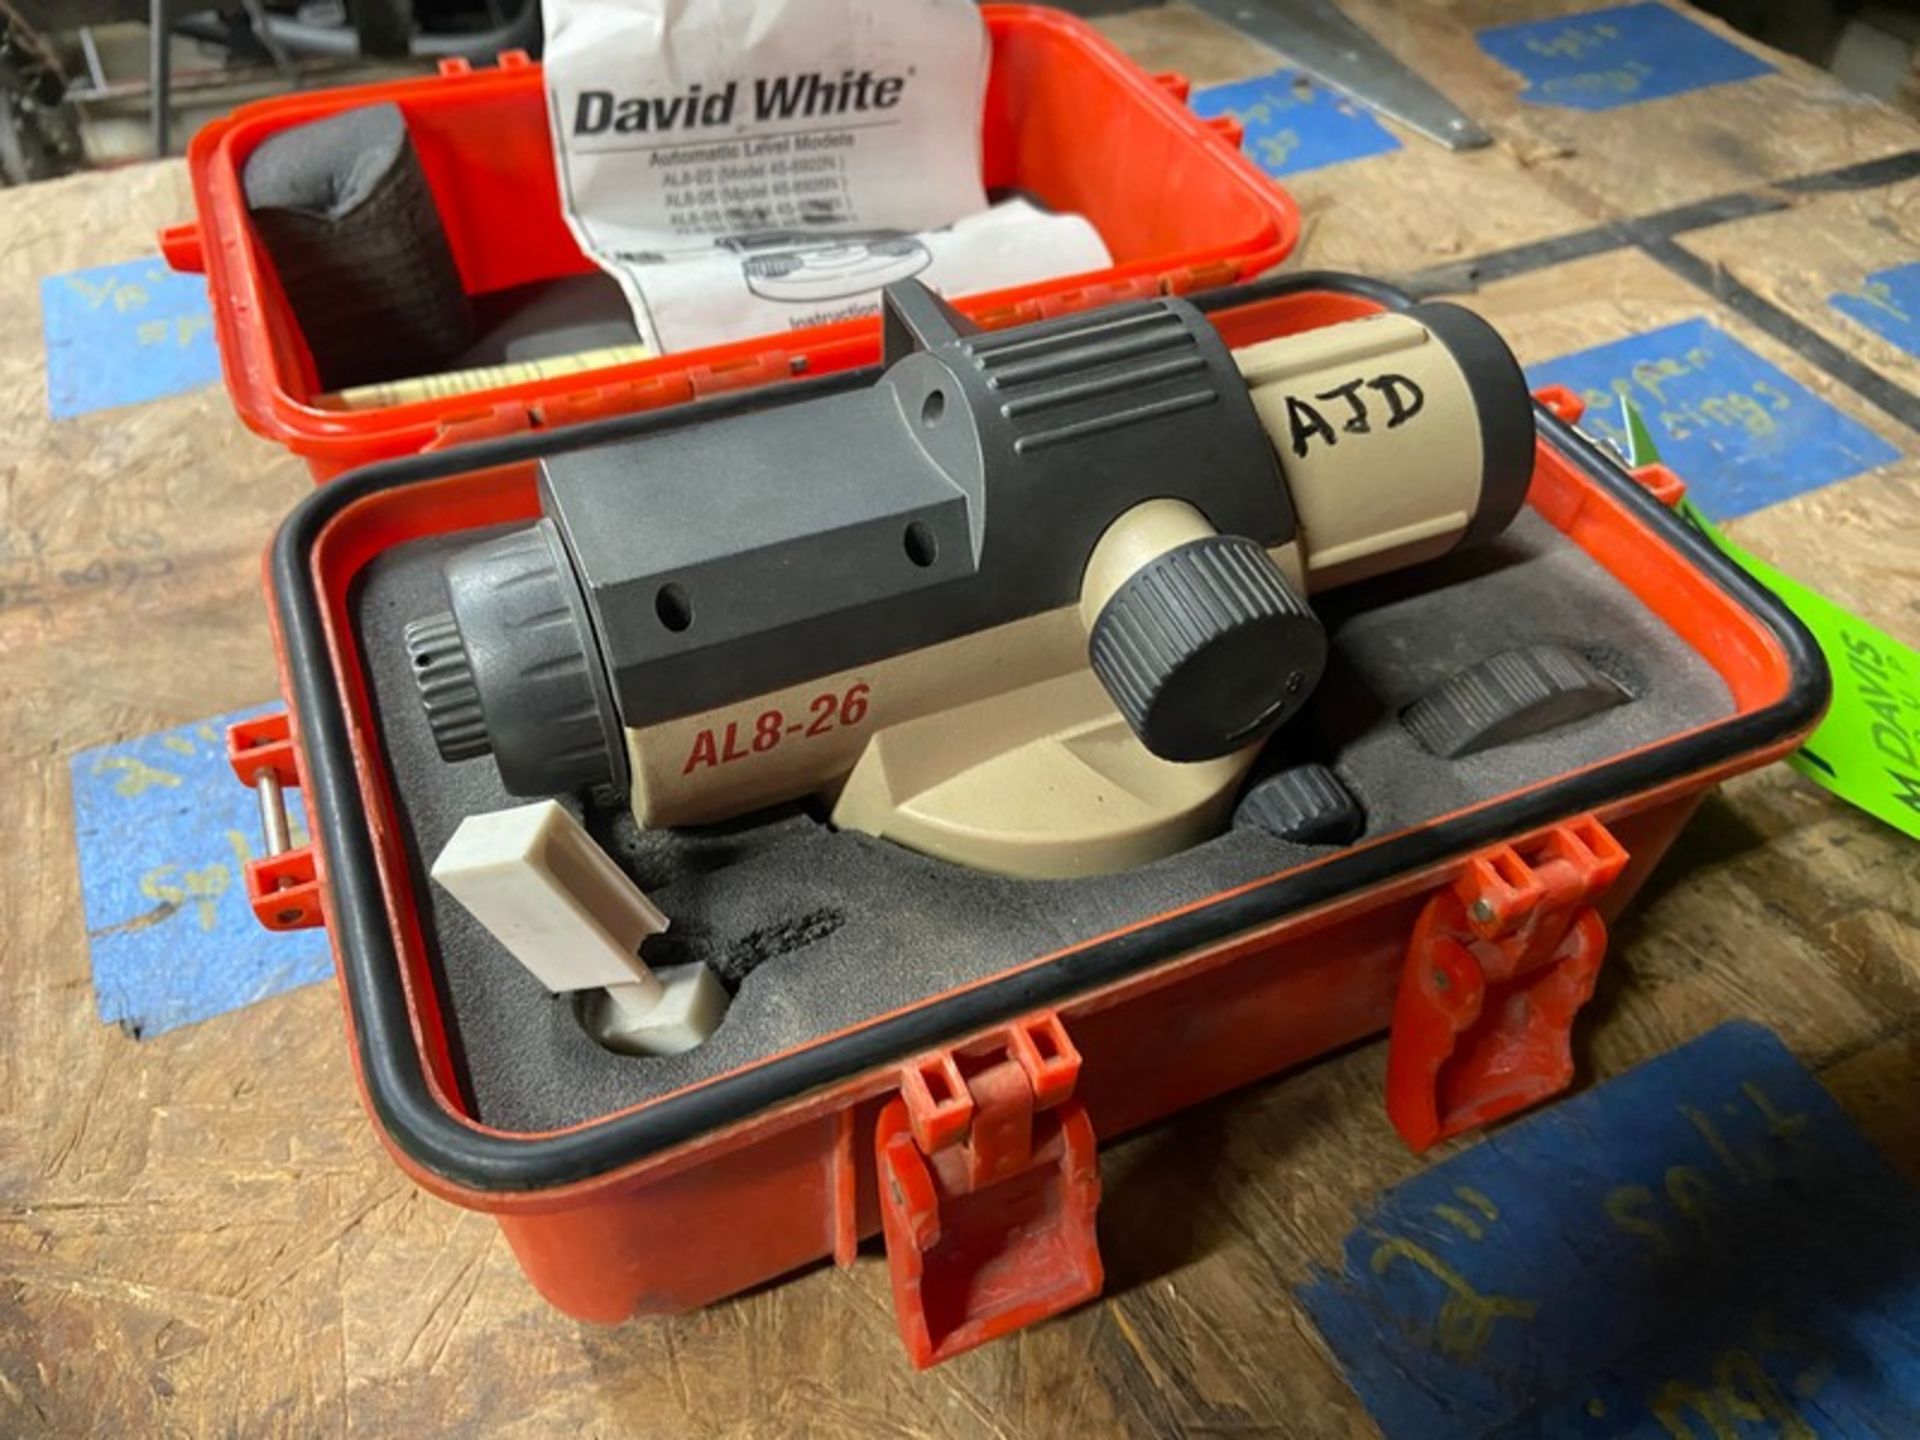 David White Automatic Level, M/N AL8-26, with Hard Case (LOCATED IN MONROEVILLE, PA)(RIGGING, - Image 3 of 5